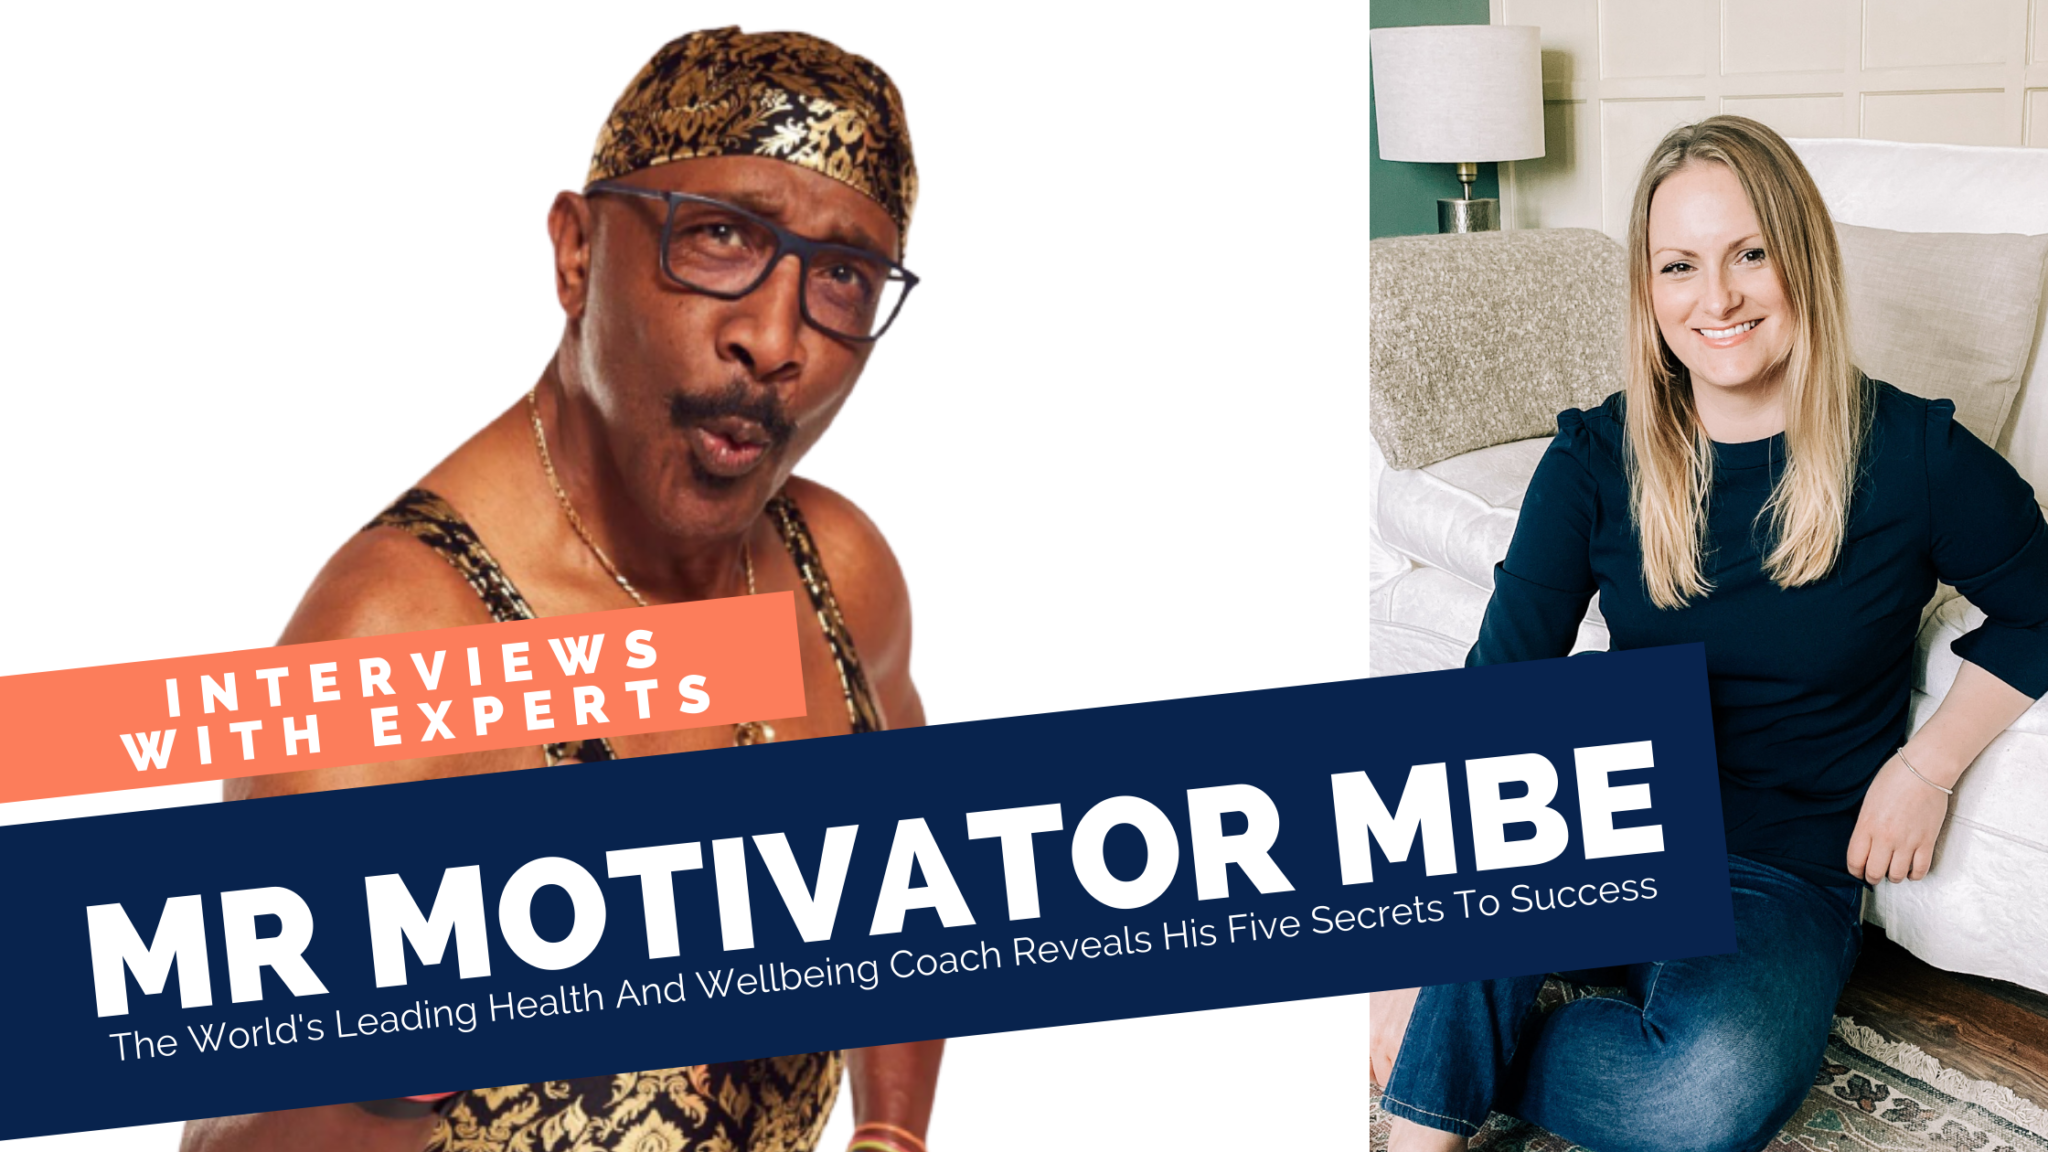 The World’s Leading Health And Wellbeing Coach Reveals His Five Secrets To Success   – With Georgia Kirke And Special Guest Derrick Errol Evans, AKA “Mr Motivator” MBE